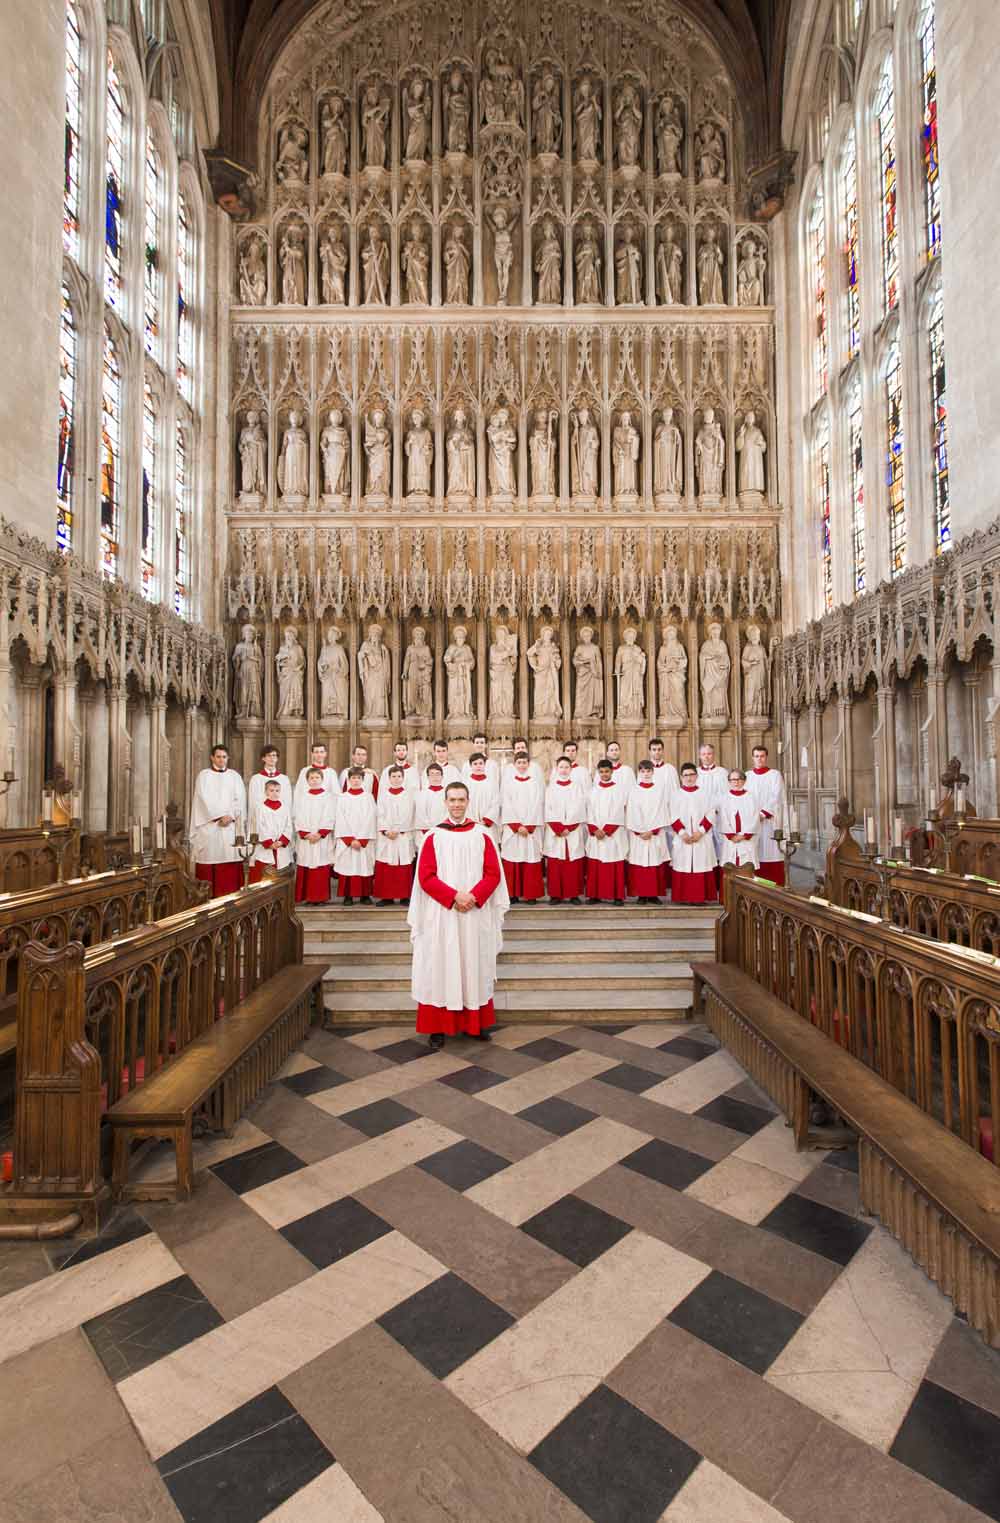 The choir in the Chapel